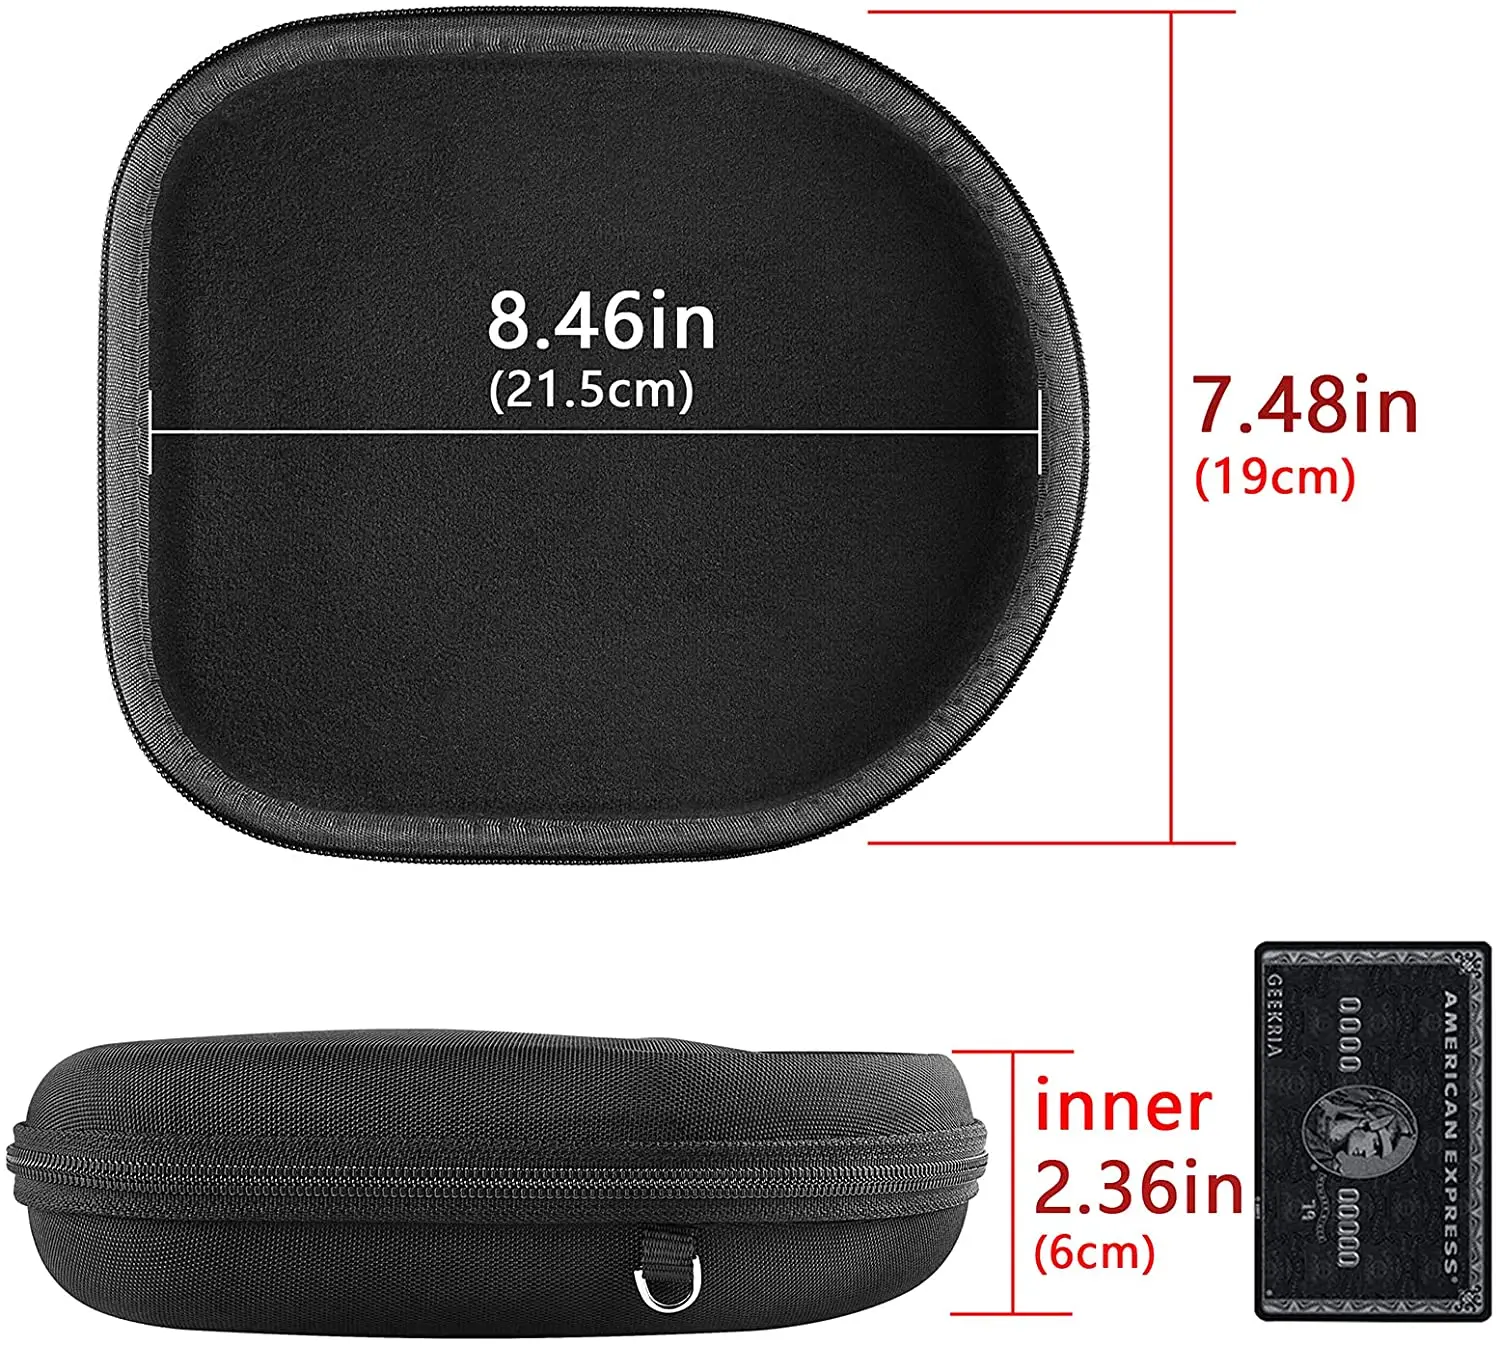 Geekria Headphones Case For Anker Soundcore Life Q35 Q20, Hard Portable Bluetooth Earphones Headset Bag For Accessories Storage enlarge